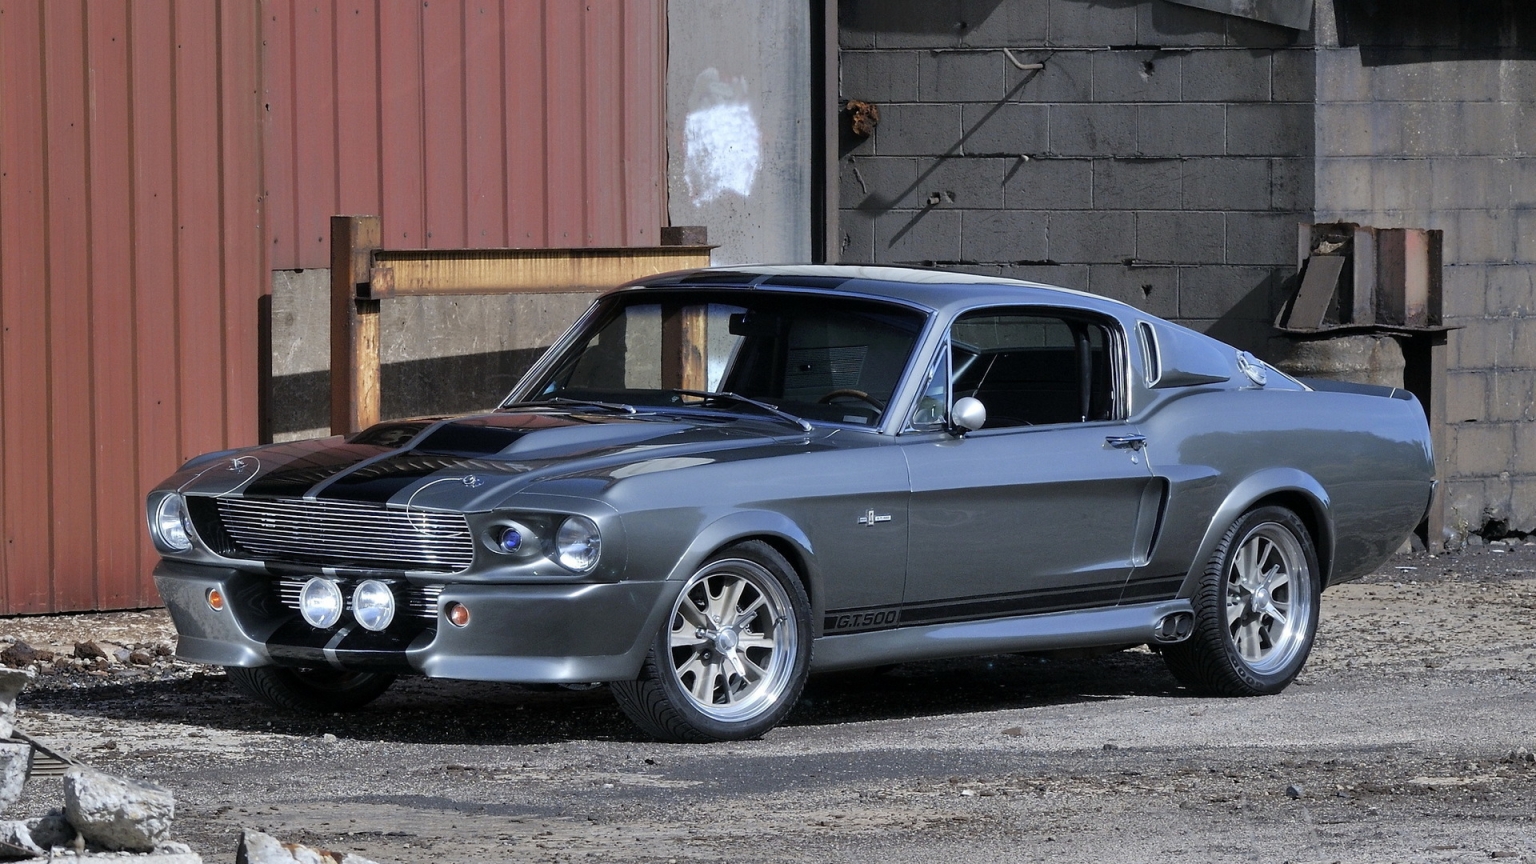 Ford Mustang GT500 Eleanor for 1536 x 864 HDTV resolution